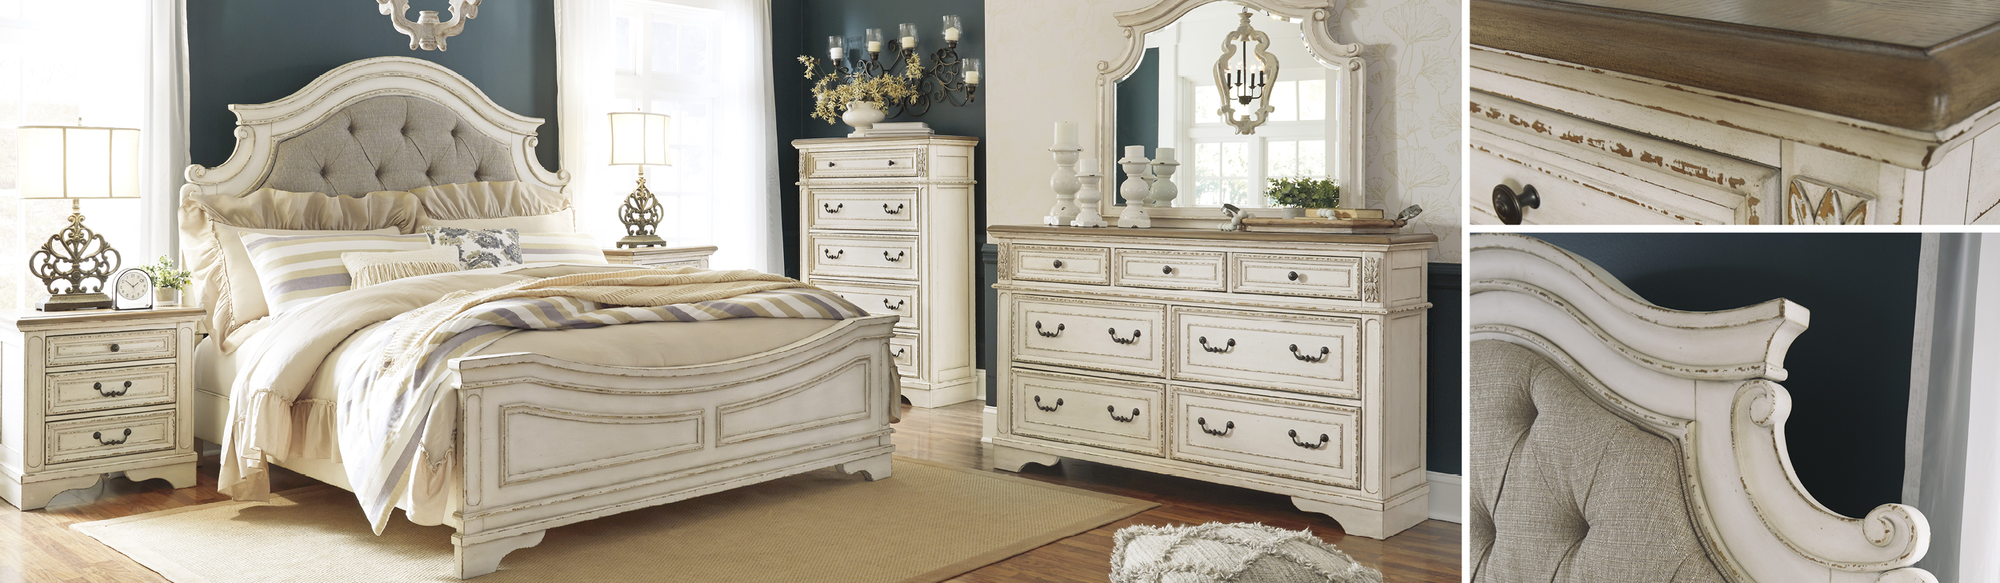 Shop the Realyn Bedroom Suite at JR Furniture Store in Fayetteville, NC 28311